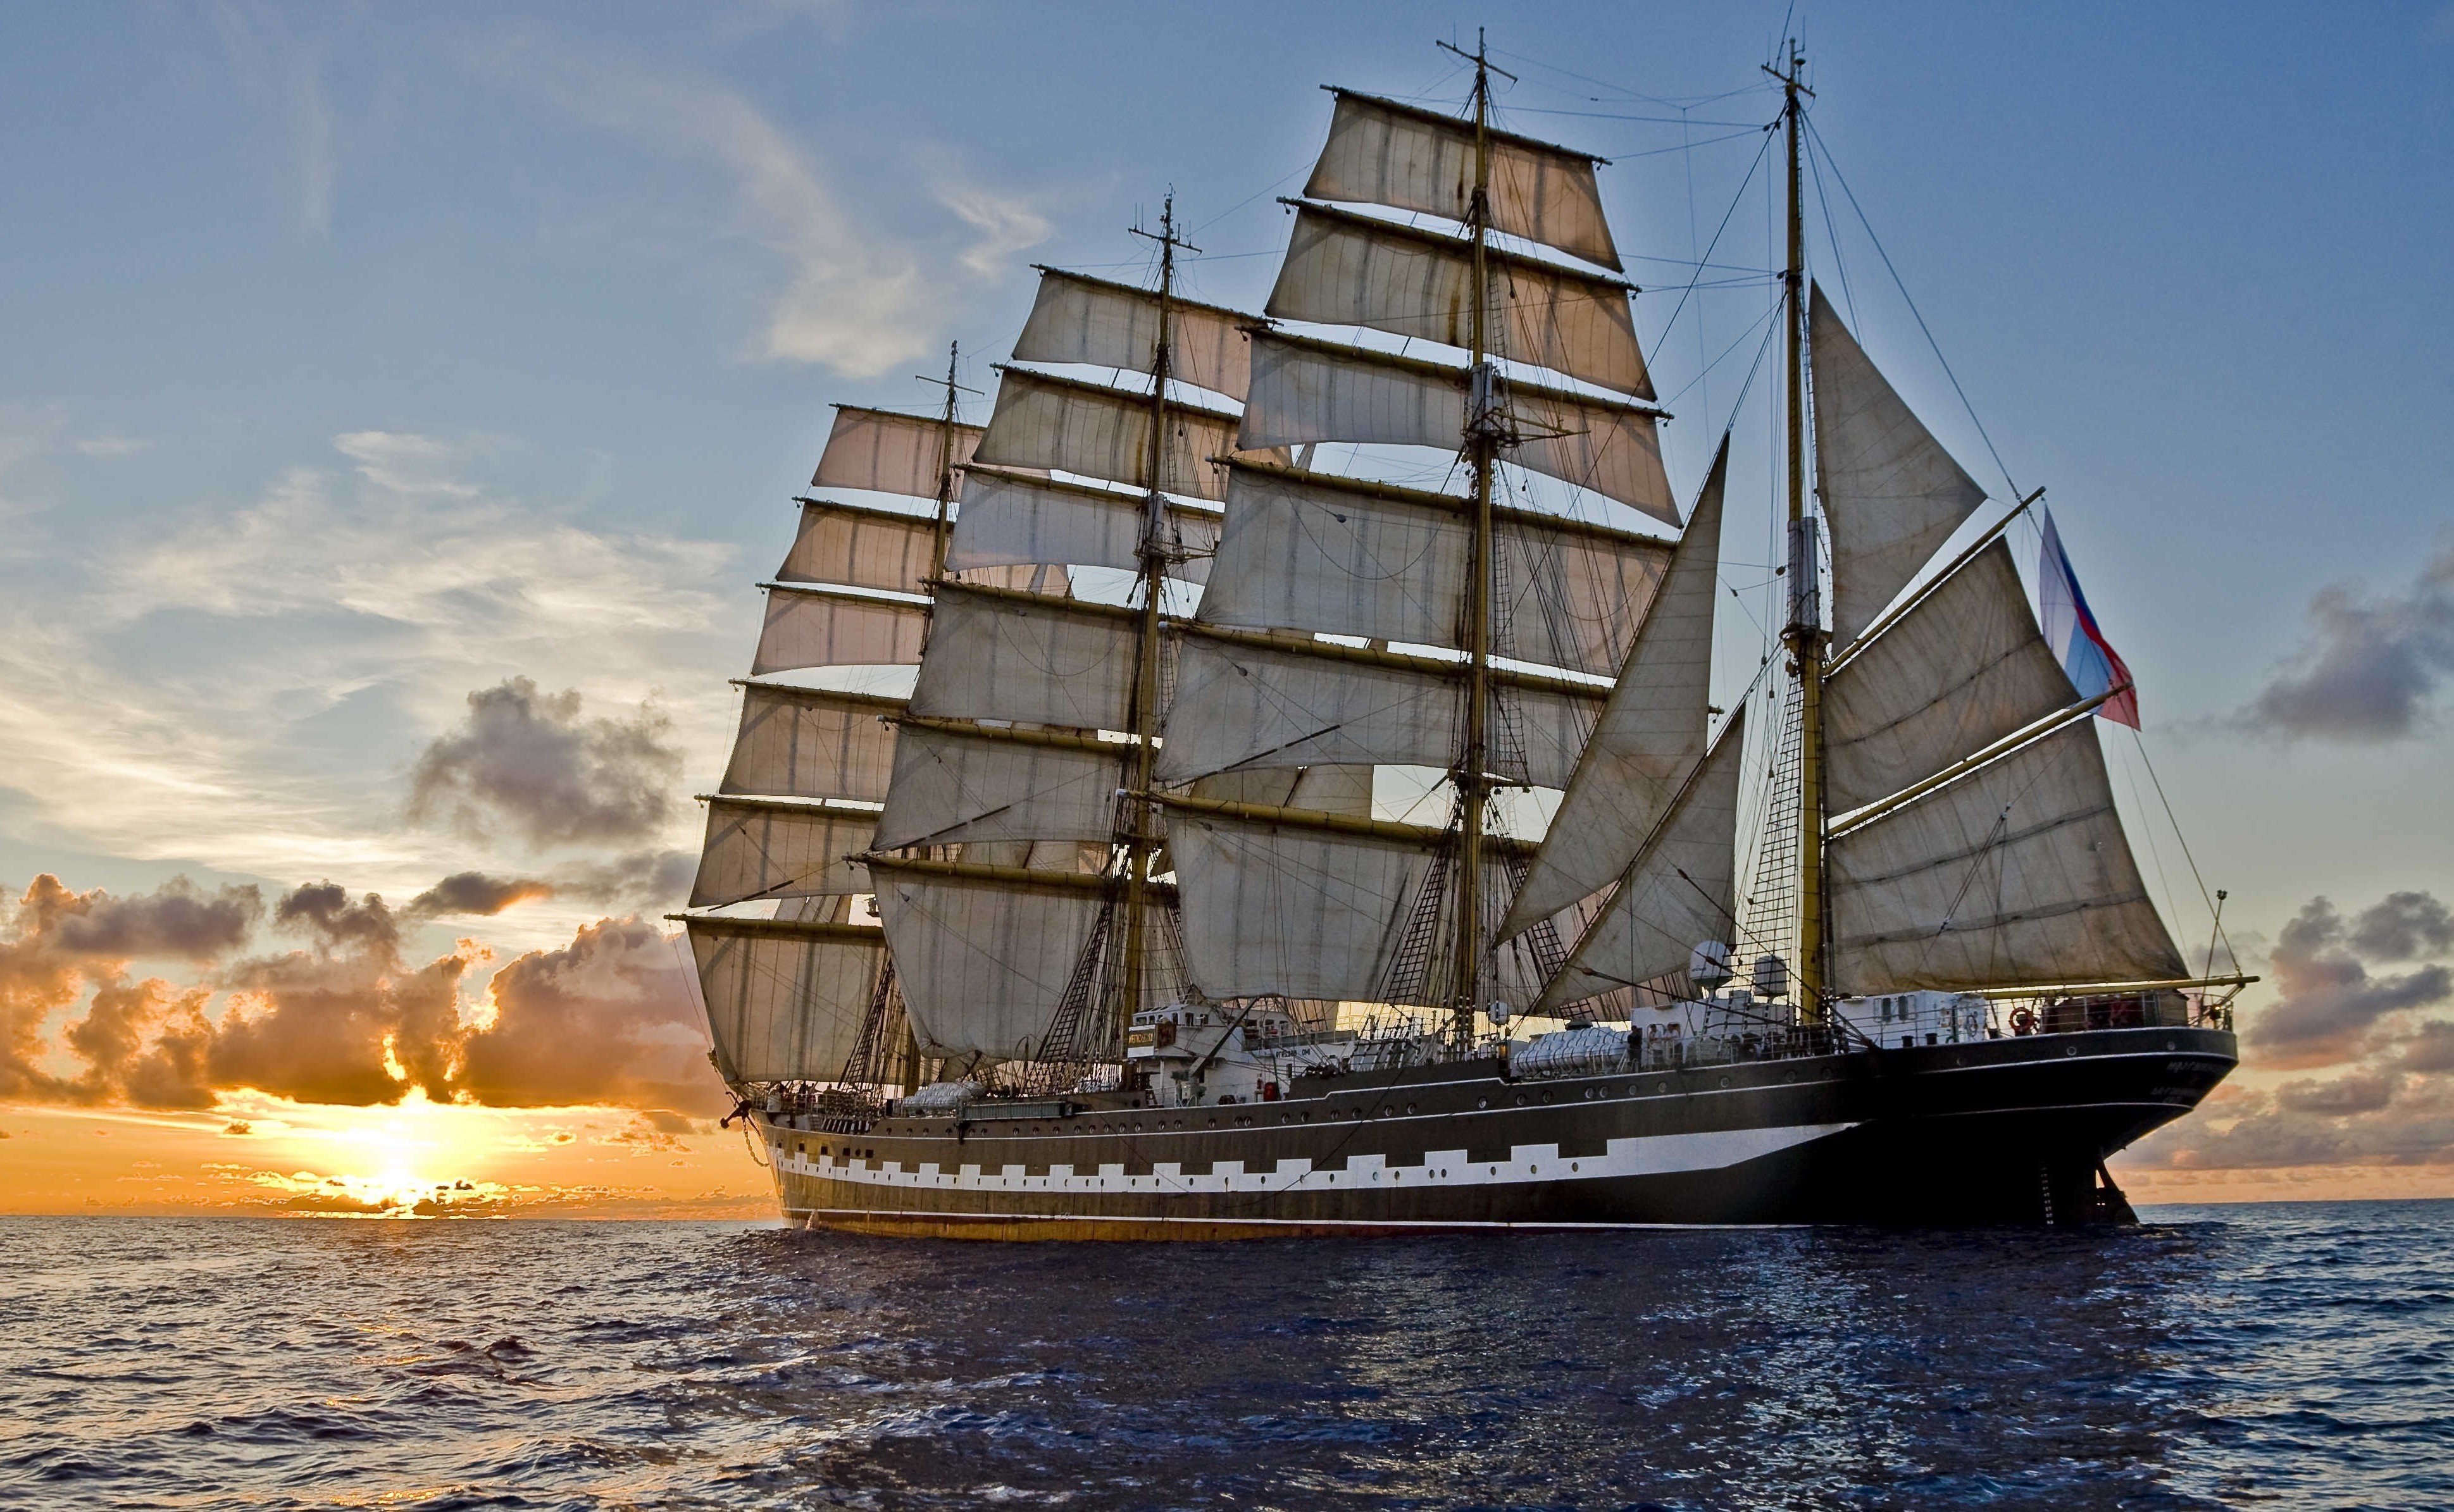 Free photo A large sailing ship sails the sea at sunset in the afternoon